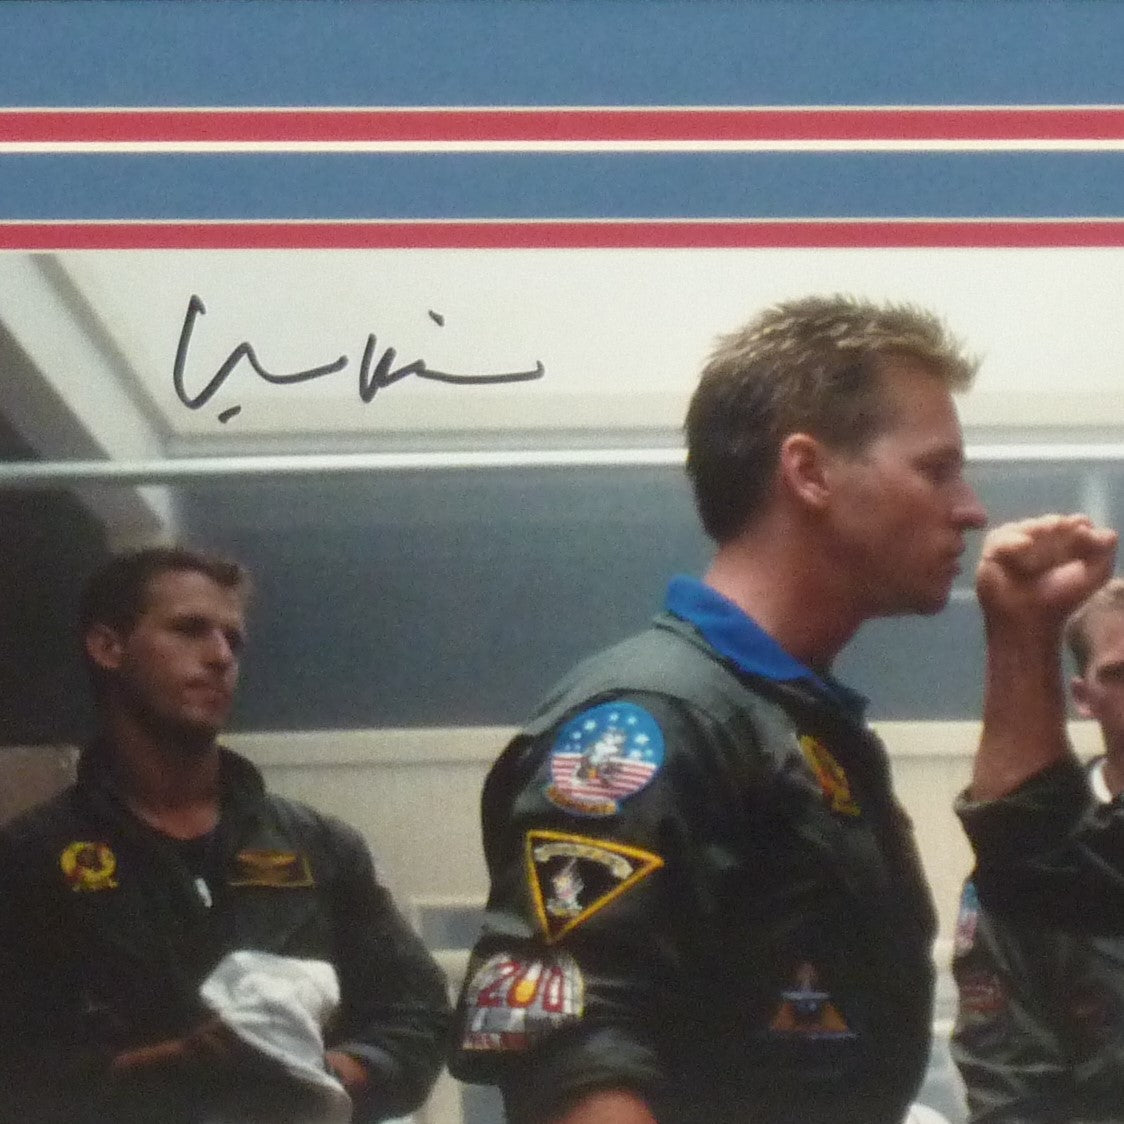 Val Kilmer Autographed TOP GUN (with Tom Cruise) Deluxe Framed 11x14 Photo - JSA